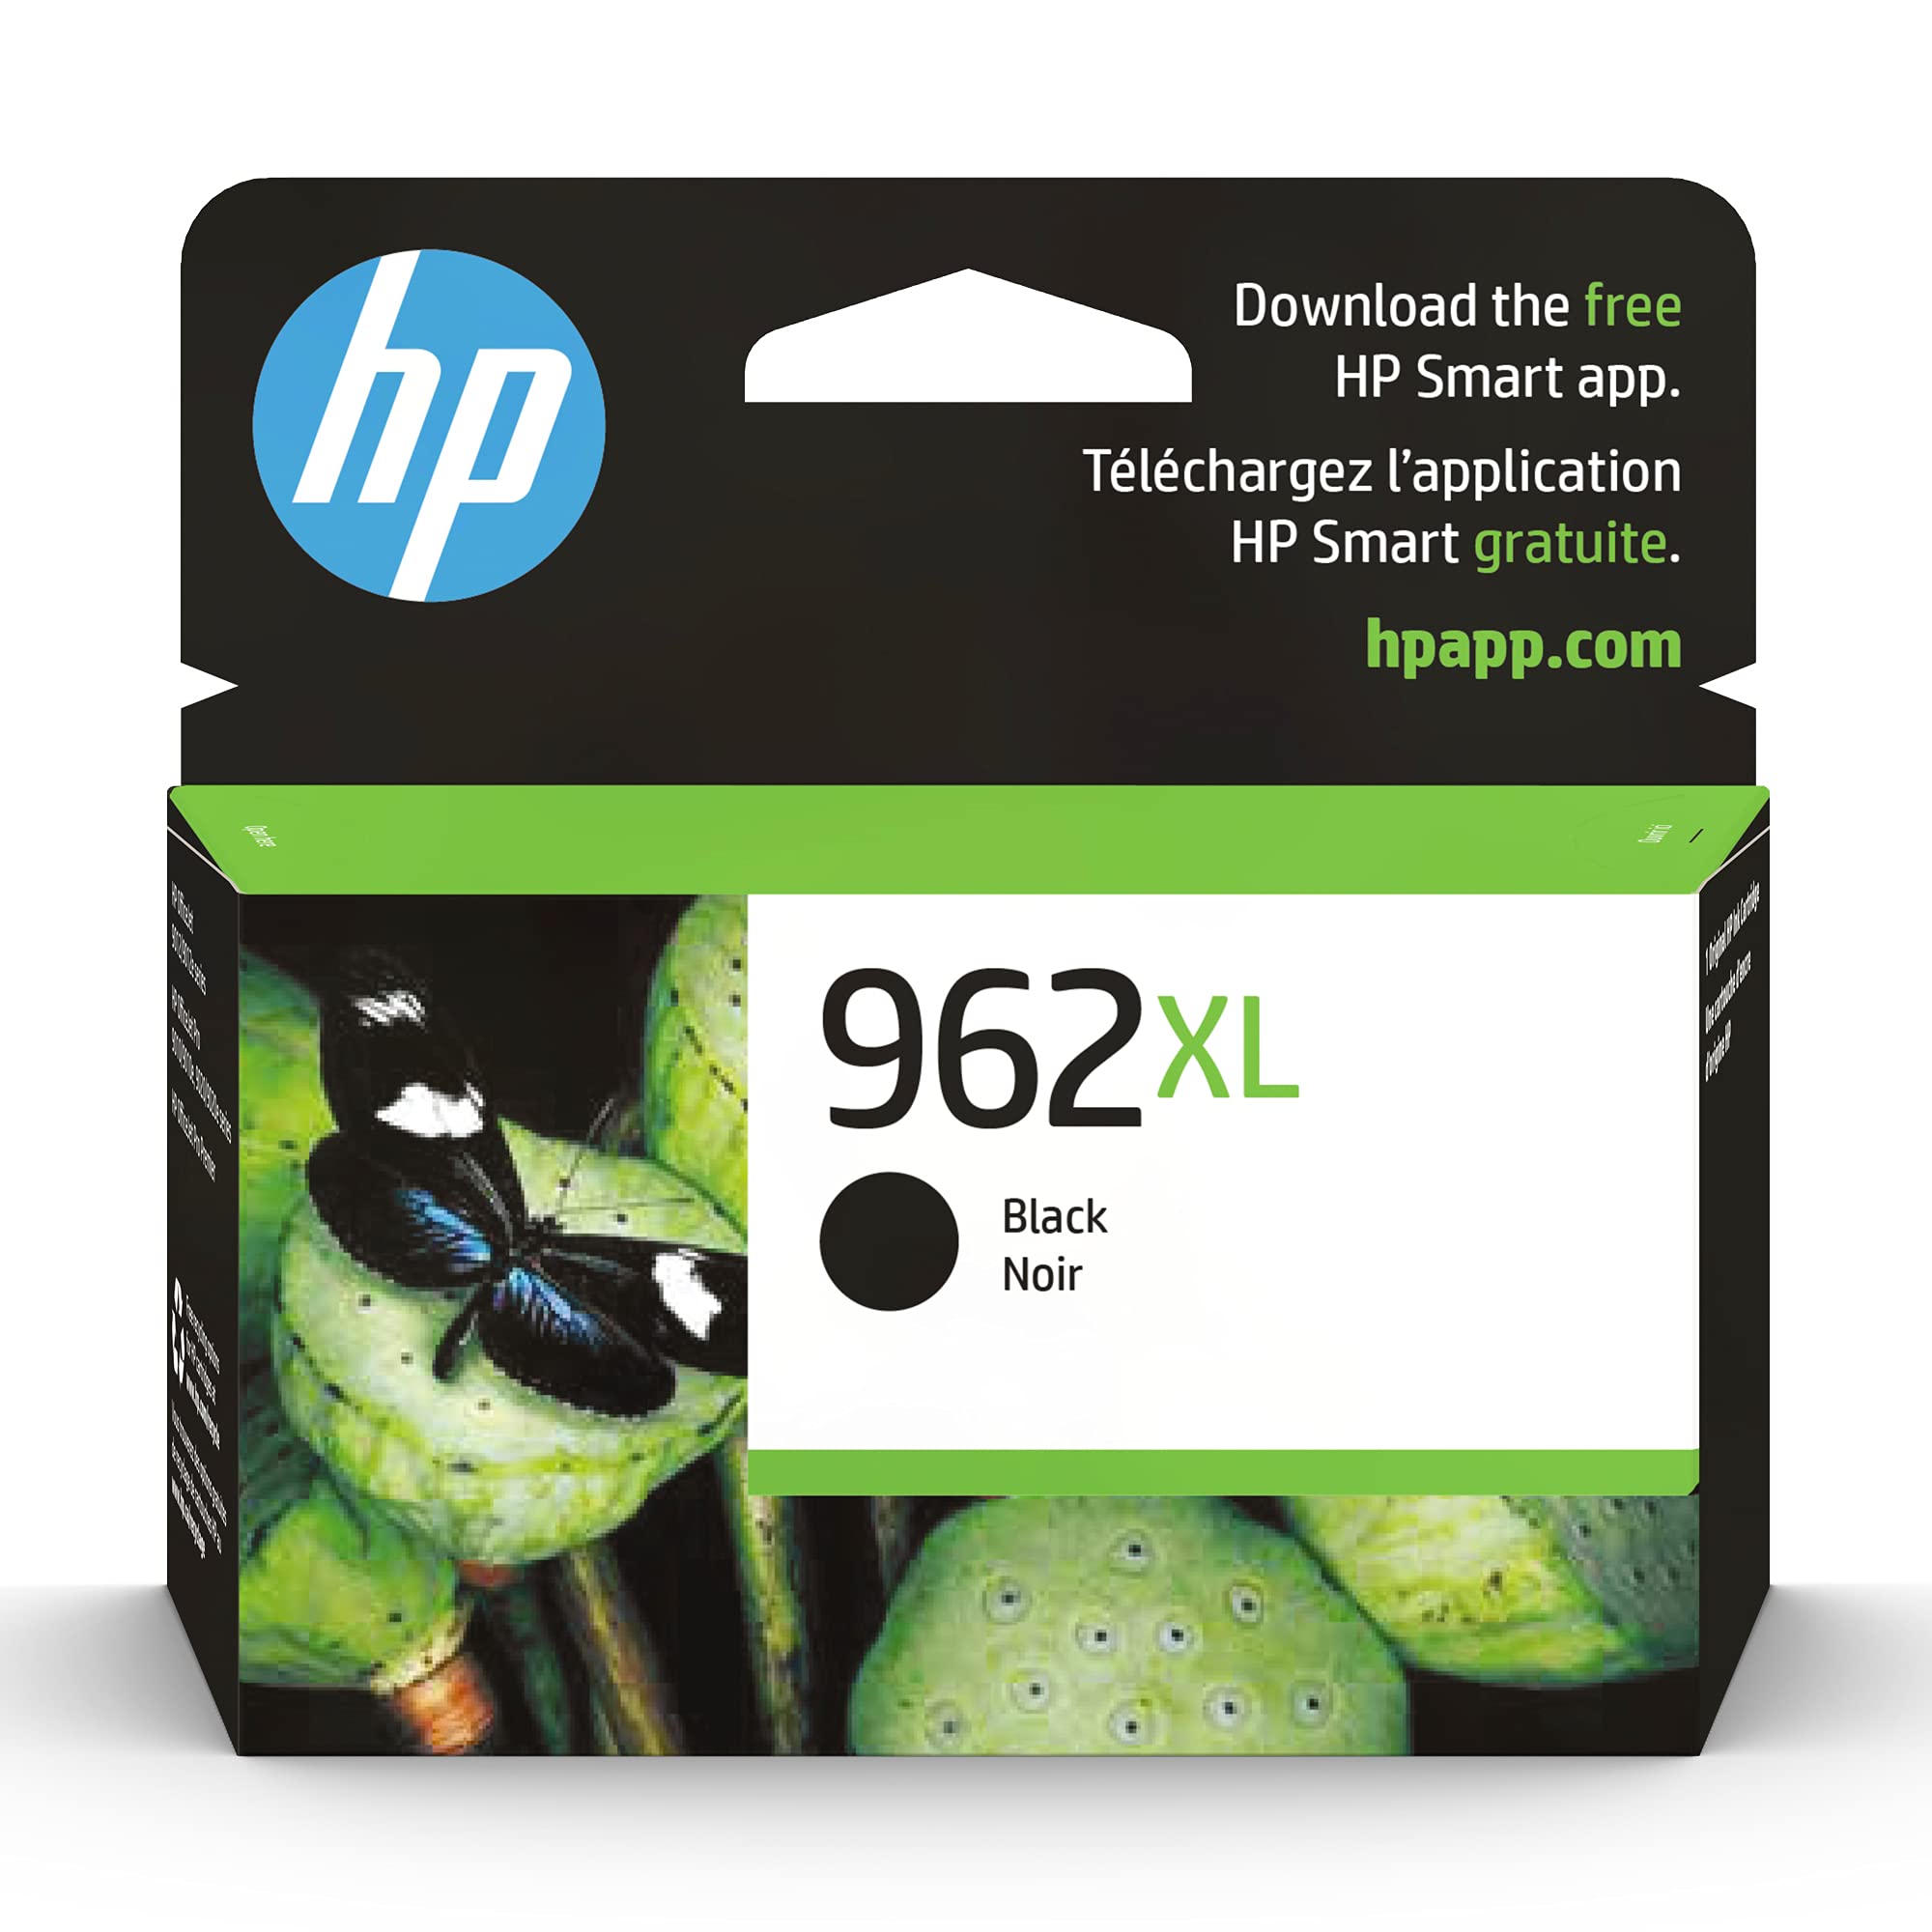 HP 962XL Black High-yield Ink Cartridge | Works with HP OfficeJet 9010 Series, HP OfficeJet Pro 9010, 9020 Series | Eligible for Instant Ink | 3JA03AN